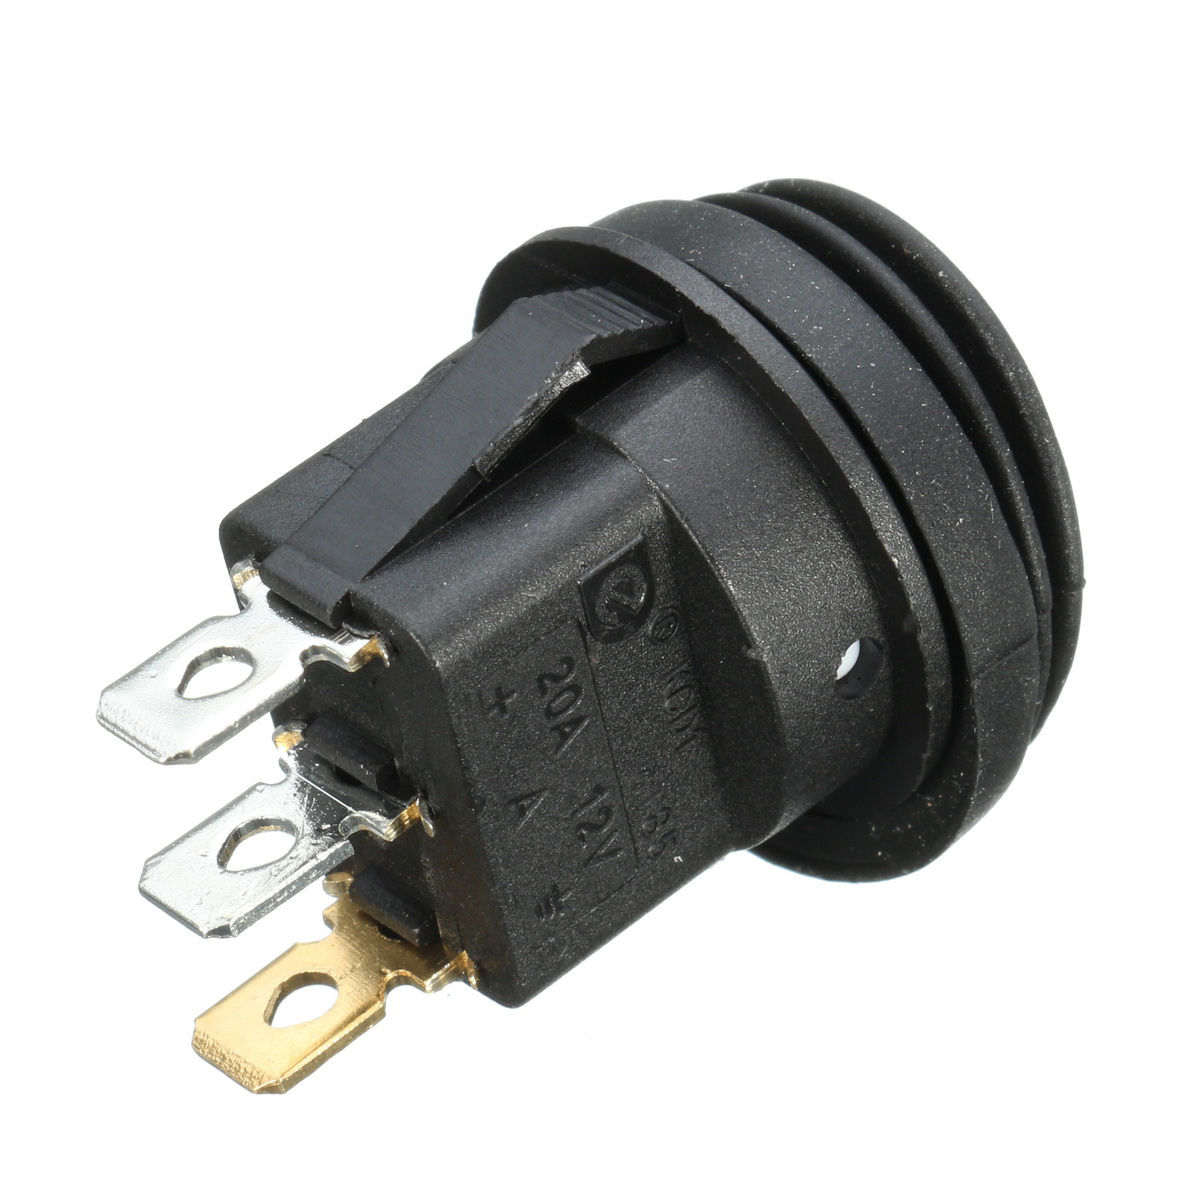 3Pin 12V 20A LED Rocker ON/OFF SPST Switch round for Car Boat Marine Waterproof